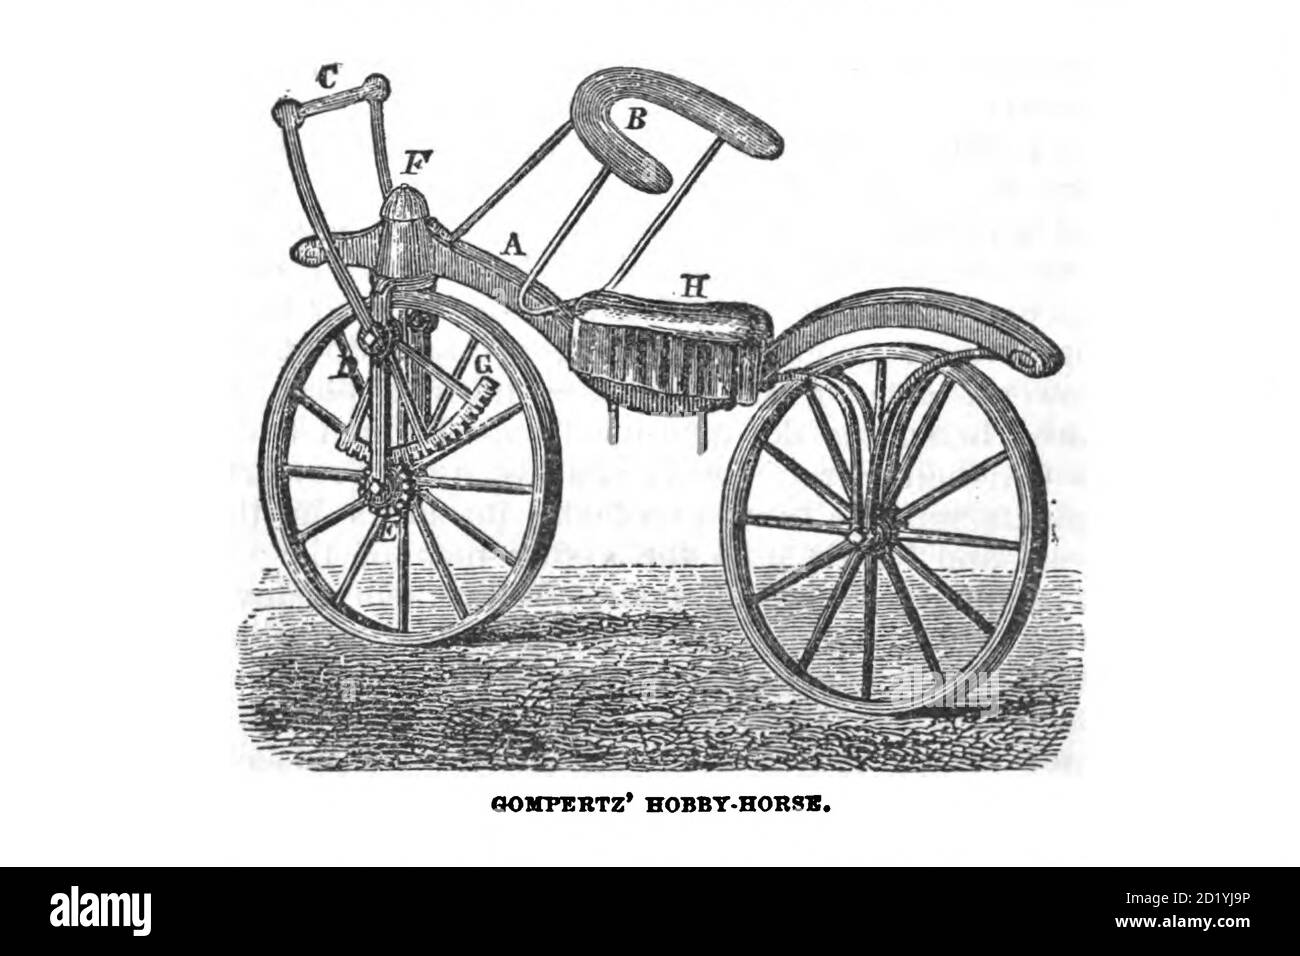 Gompertz' Hobby-Horse [Early pedal-less bicycle] from The American bicycler: a manual for the observer, the learner, and the expert by Pratt, Charles E. (Charles Eadward), 1845-1898. Publication date 1879. Publisher Boston, Houghton, Osgood and company Stock Photo